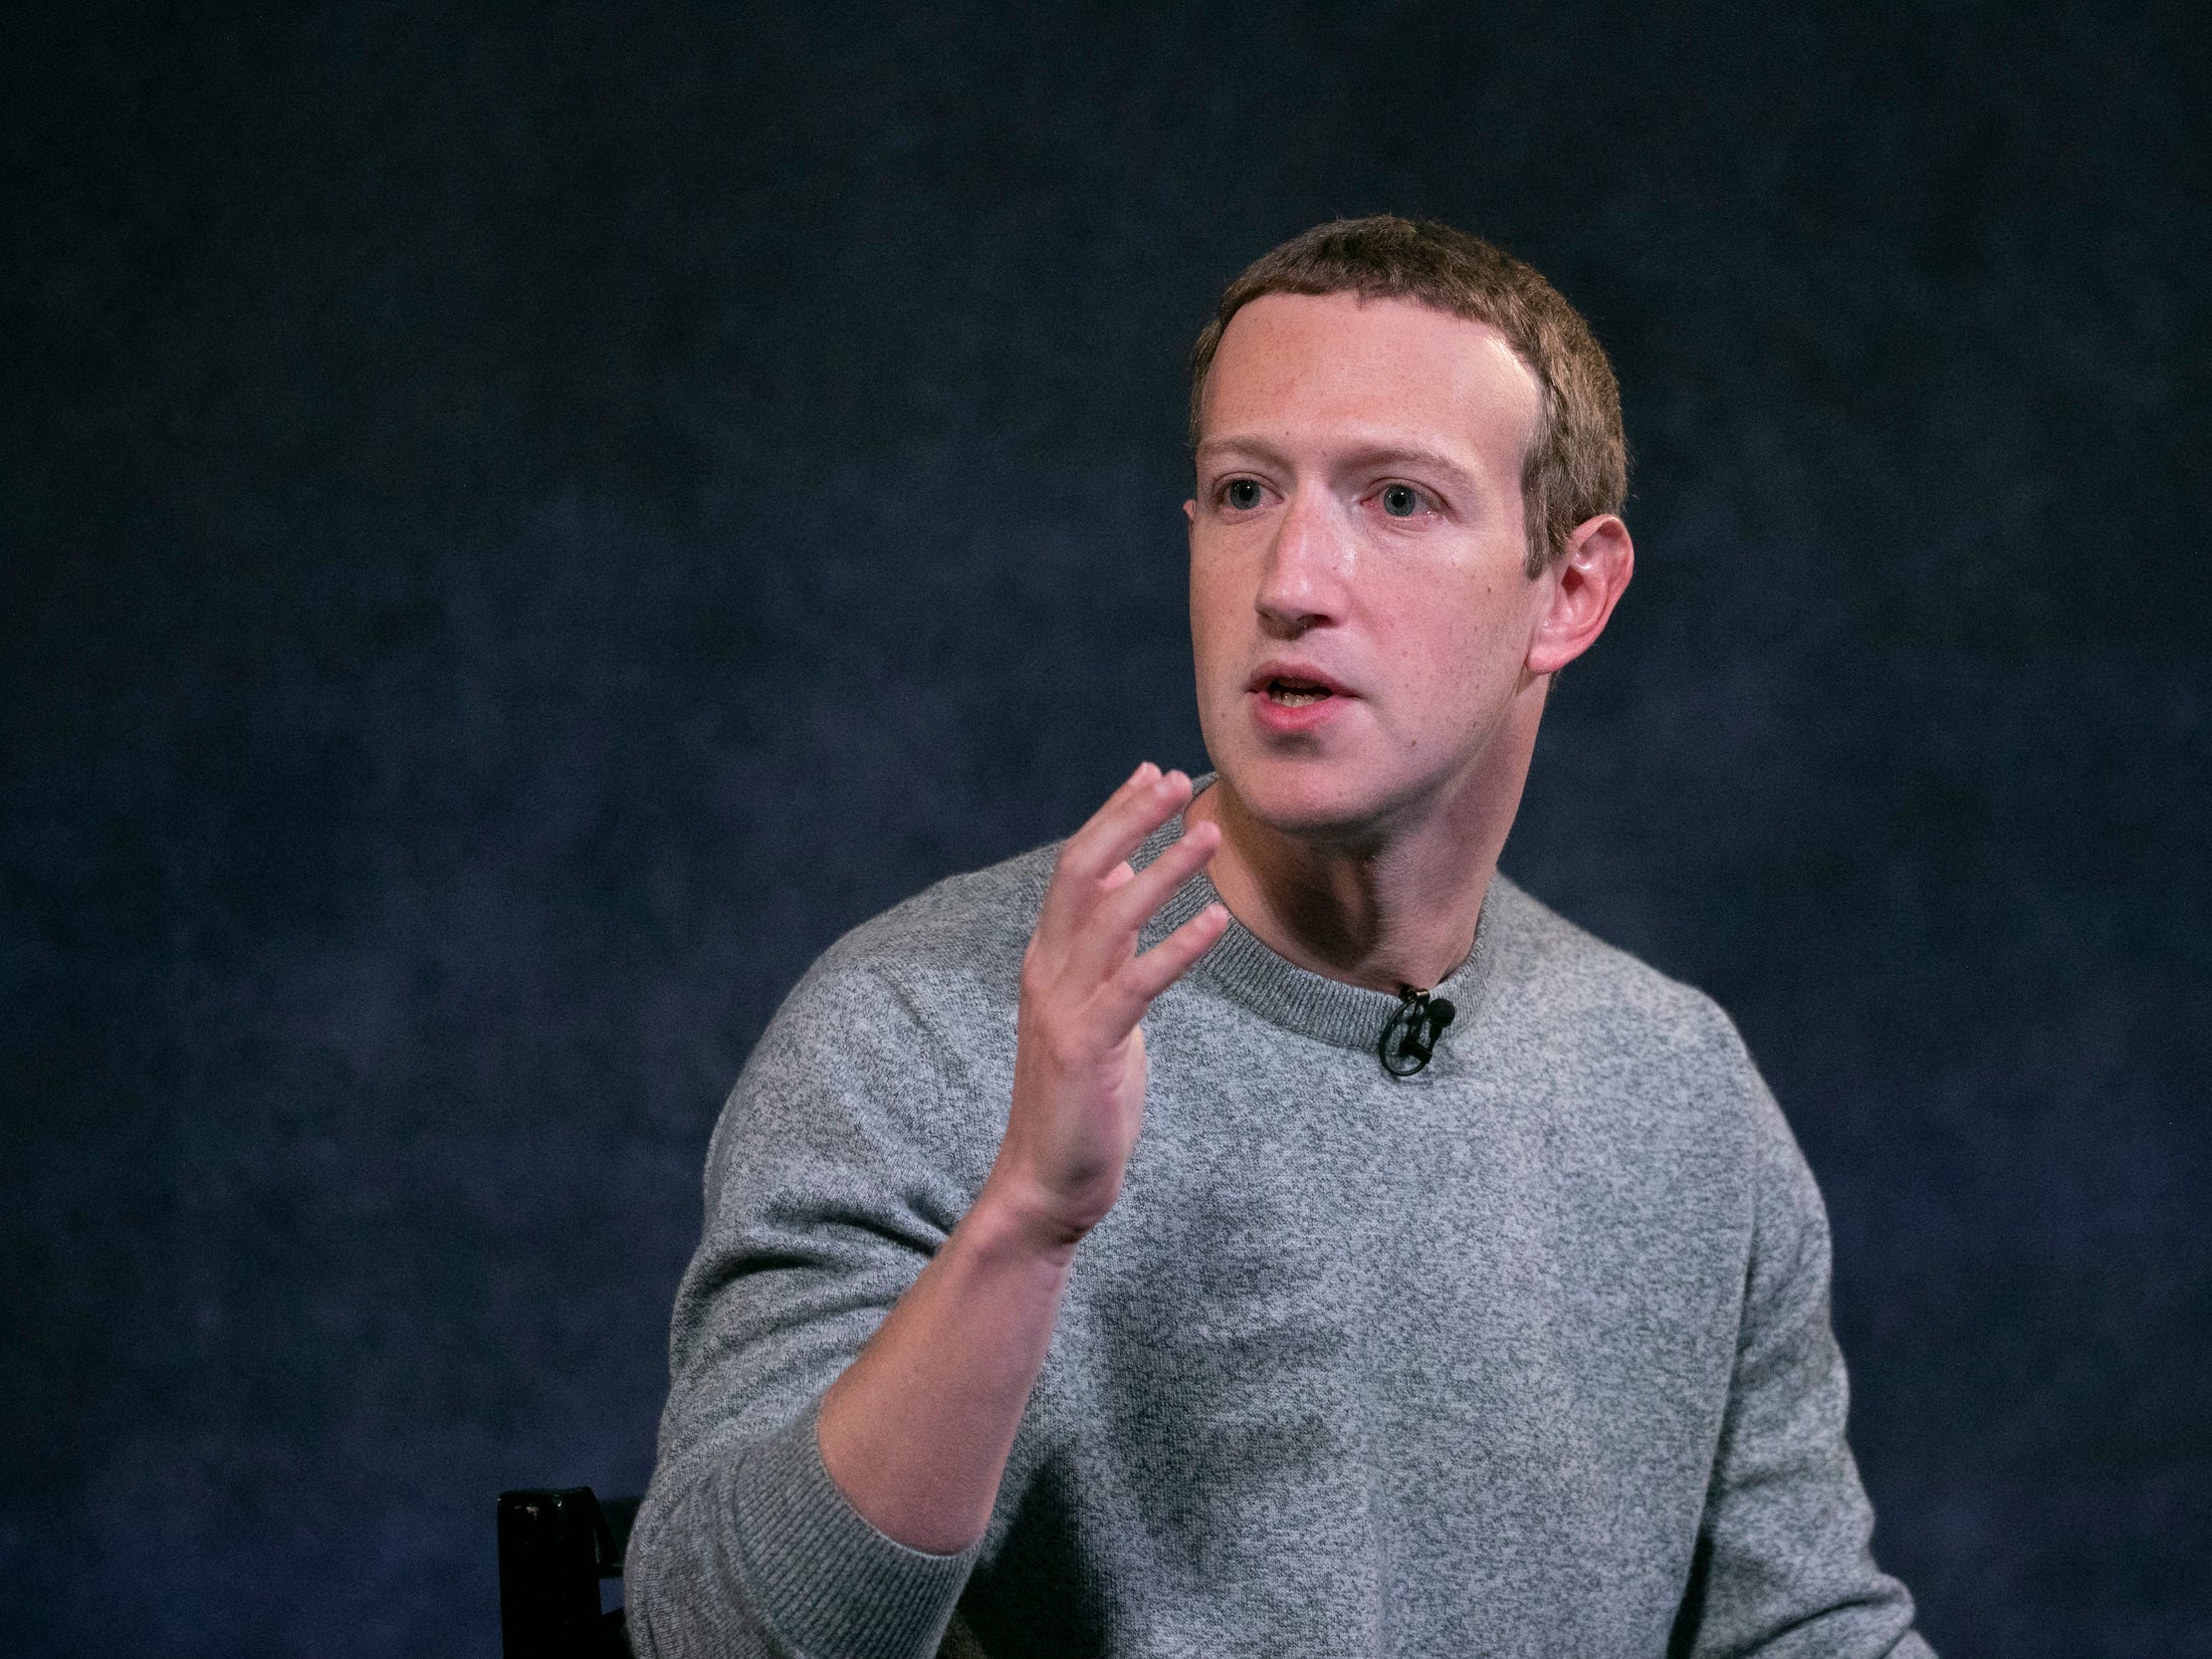 <p>Roughly 10,000 Meta workers will find out that their jobs have been cut between March and May, according to an announcement by the company's founder and CEO, Mark Zuckerberg. </p><p>Zuckerberg also said the company would close around 5,000 open roles that haven't yet been filled as part of the company's effort to downsize. </p><p>"My hope is to make these org changes as soon as possible in the year so we can get past this period of uncertainty and focus on the critical work ahead," Zuckerberg wrote in a post on Facebook announcing the layoffs. </p><p>In the post, Zuckerberg said that members of Meta's recruiting team would learn about the fate of their jobs in March, while tech workers would find out in late April, and business groups would find out in May. </p><p>"In a small number of cases, it may take through the end of the year to complete these changes," he wrote. </p><p>The job cuts come less than 5 months after Meta slashed 11,000 workers, or about 13% of its workforce, in November. At the time, Zuckerberg called the layoffs a "last resort." </p>